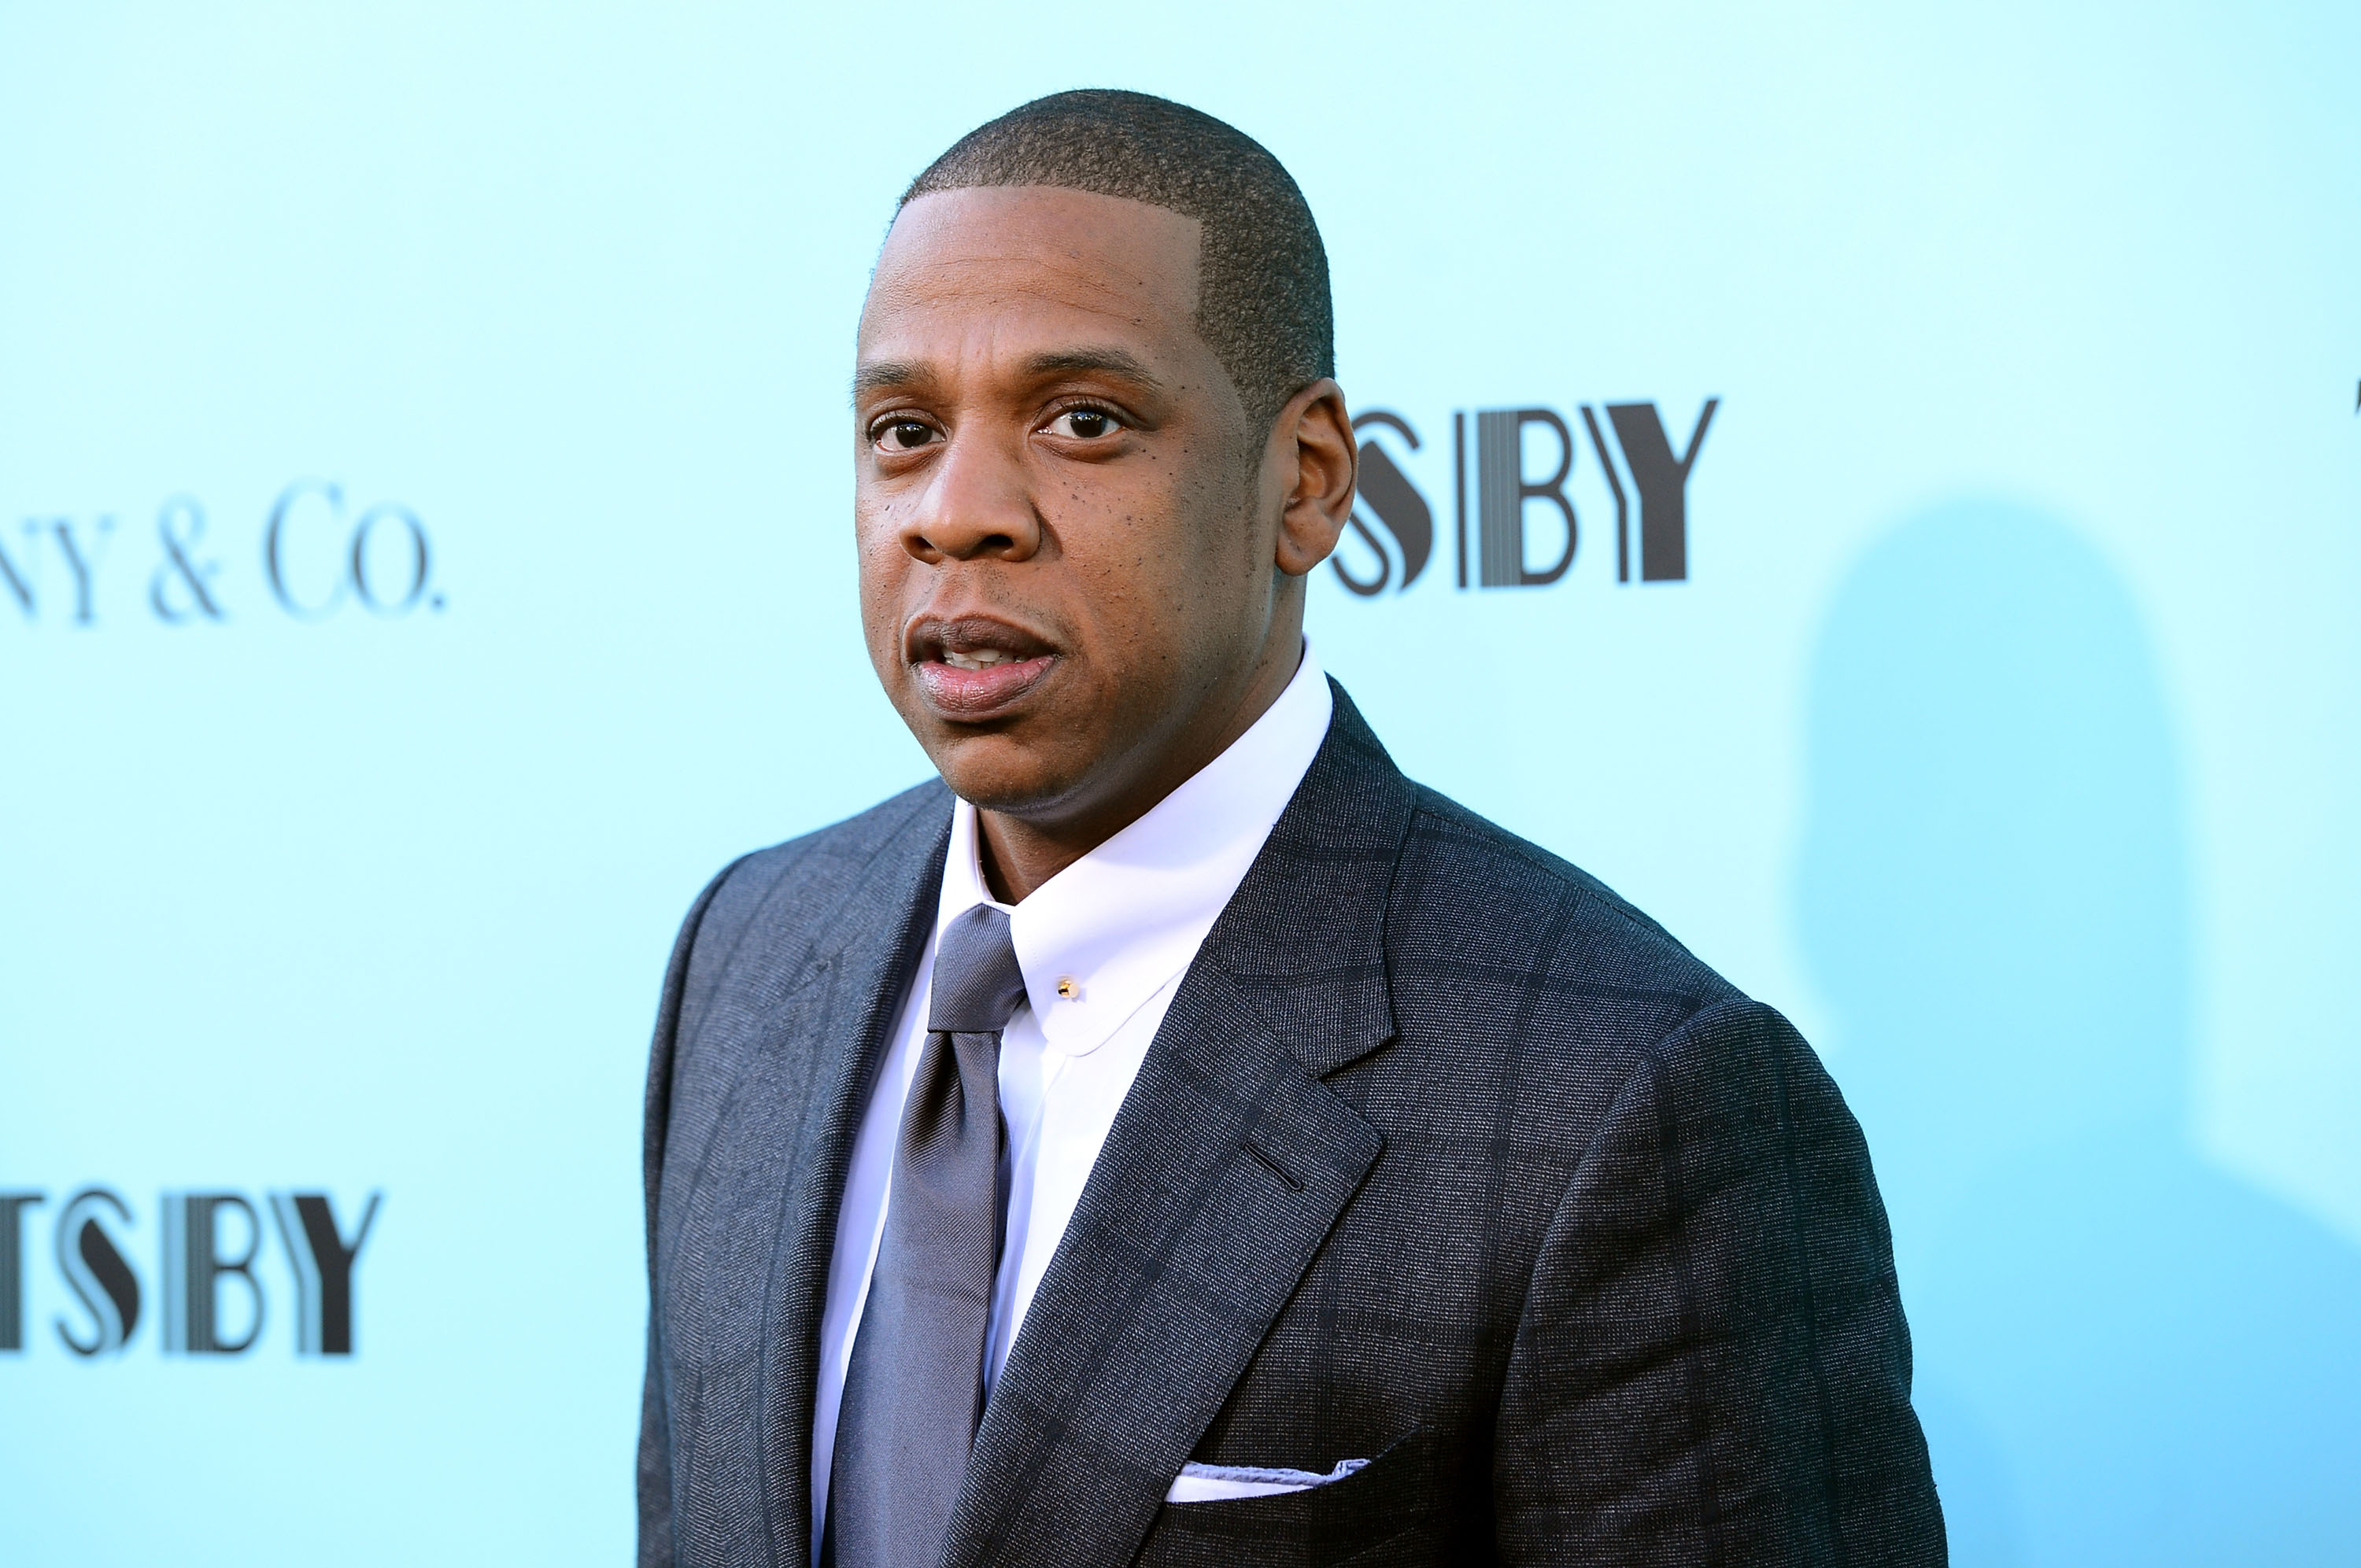 Jay-Z attends the "The Great Gatsby" world premiere at Avery Fisher Hall at Lincoln Center for the Performing Arts on May 1, 2013, in New York City. | Source: Getty Images